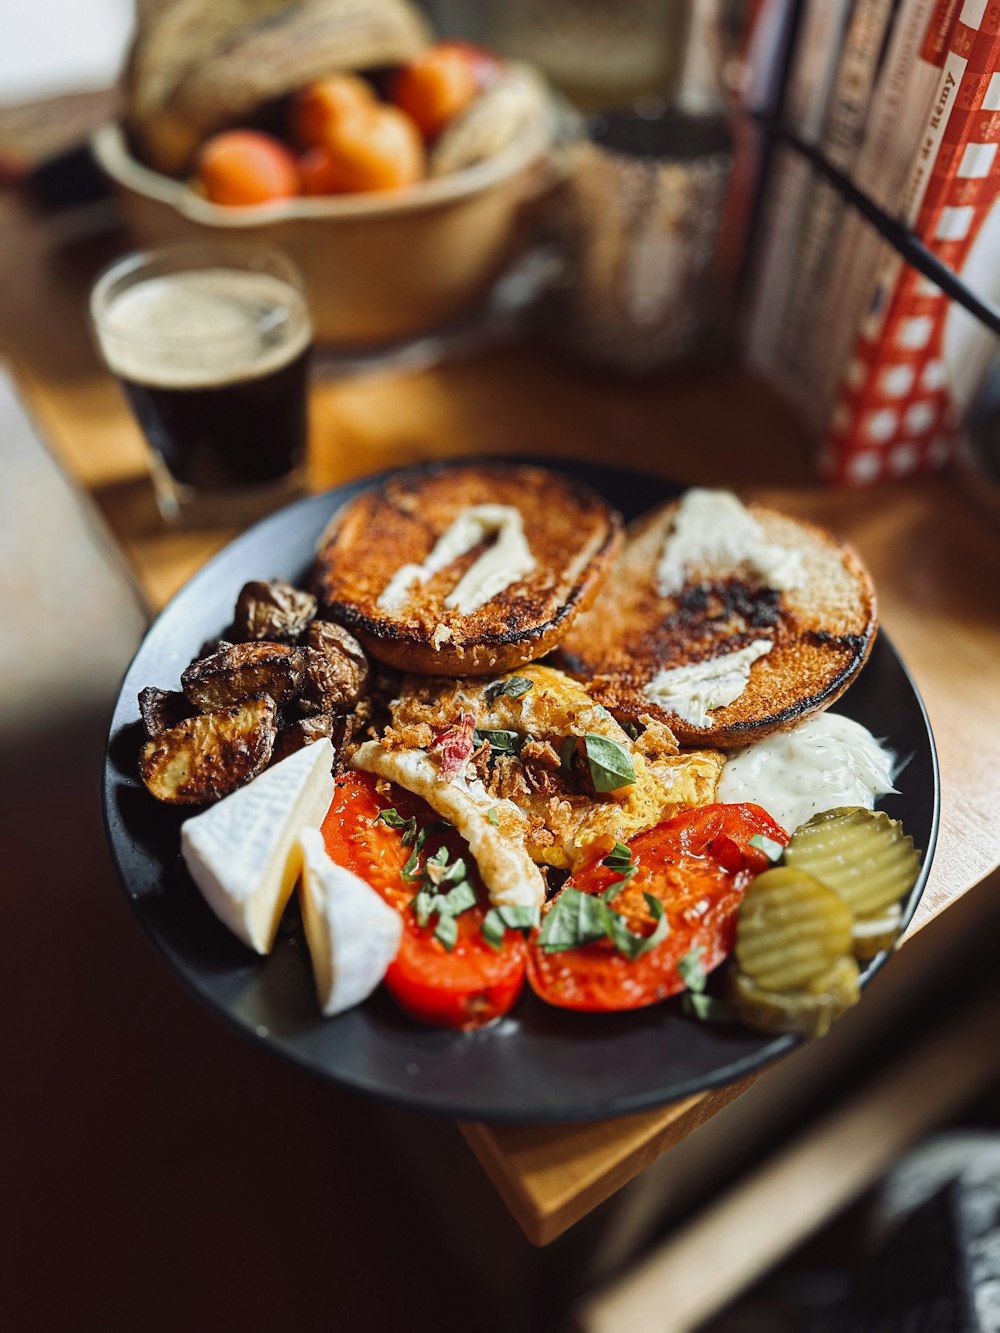 a plate of food on a wooden table